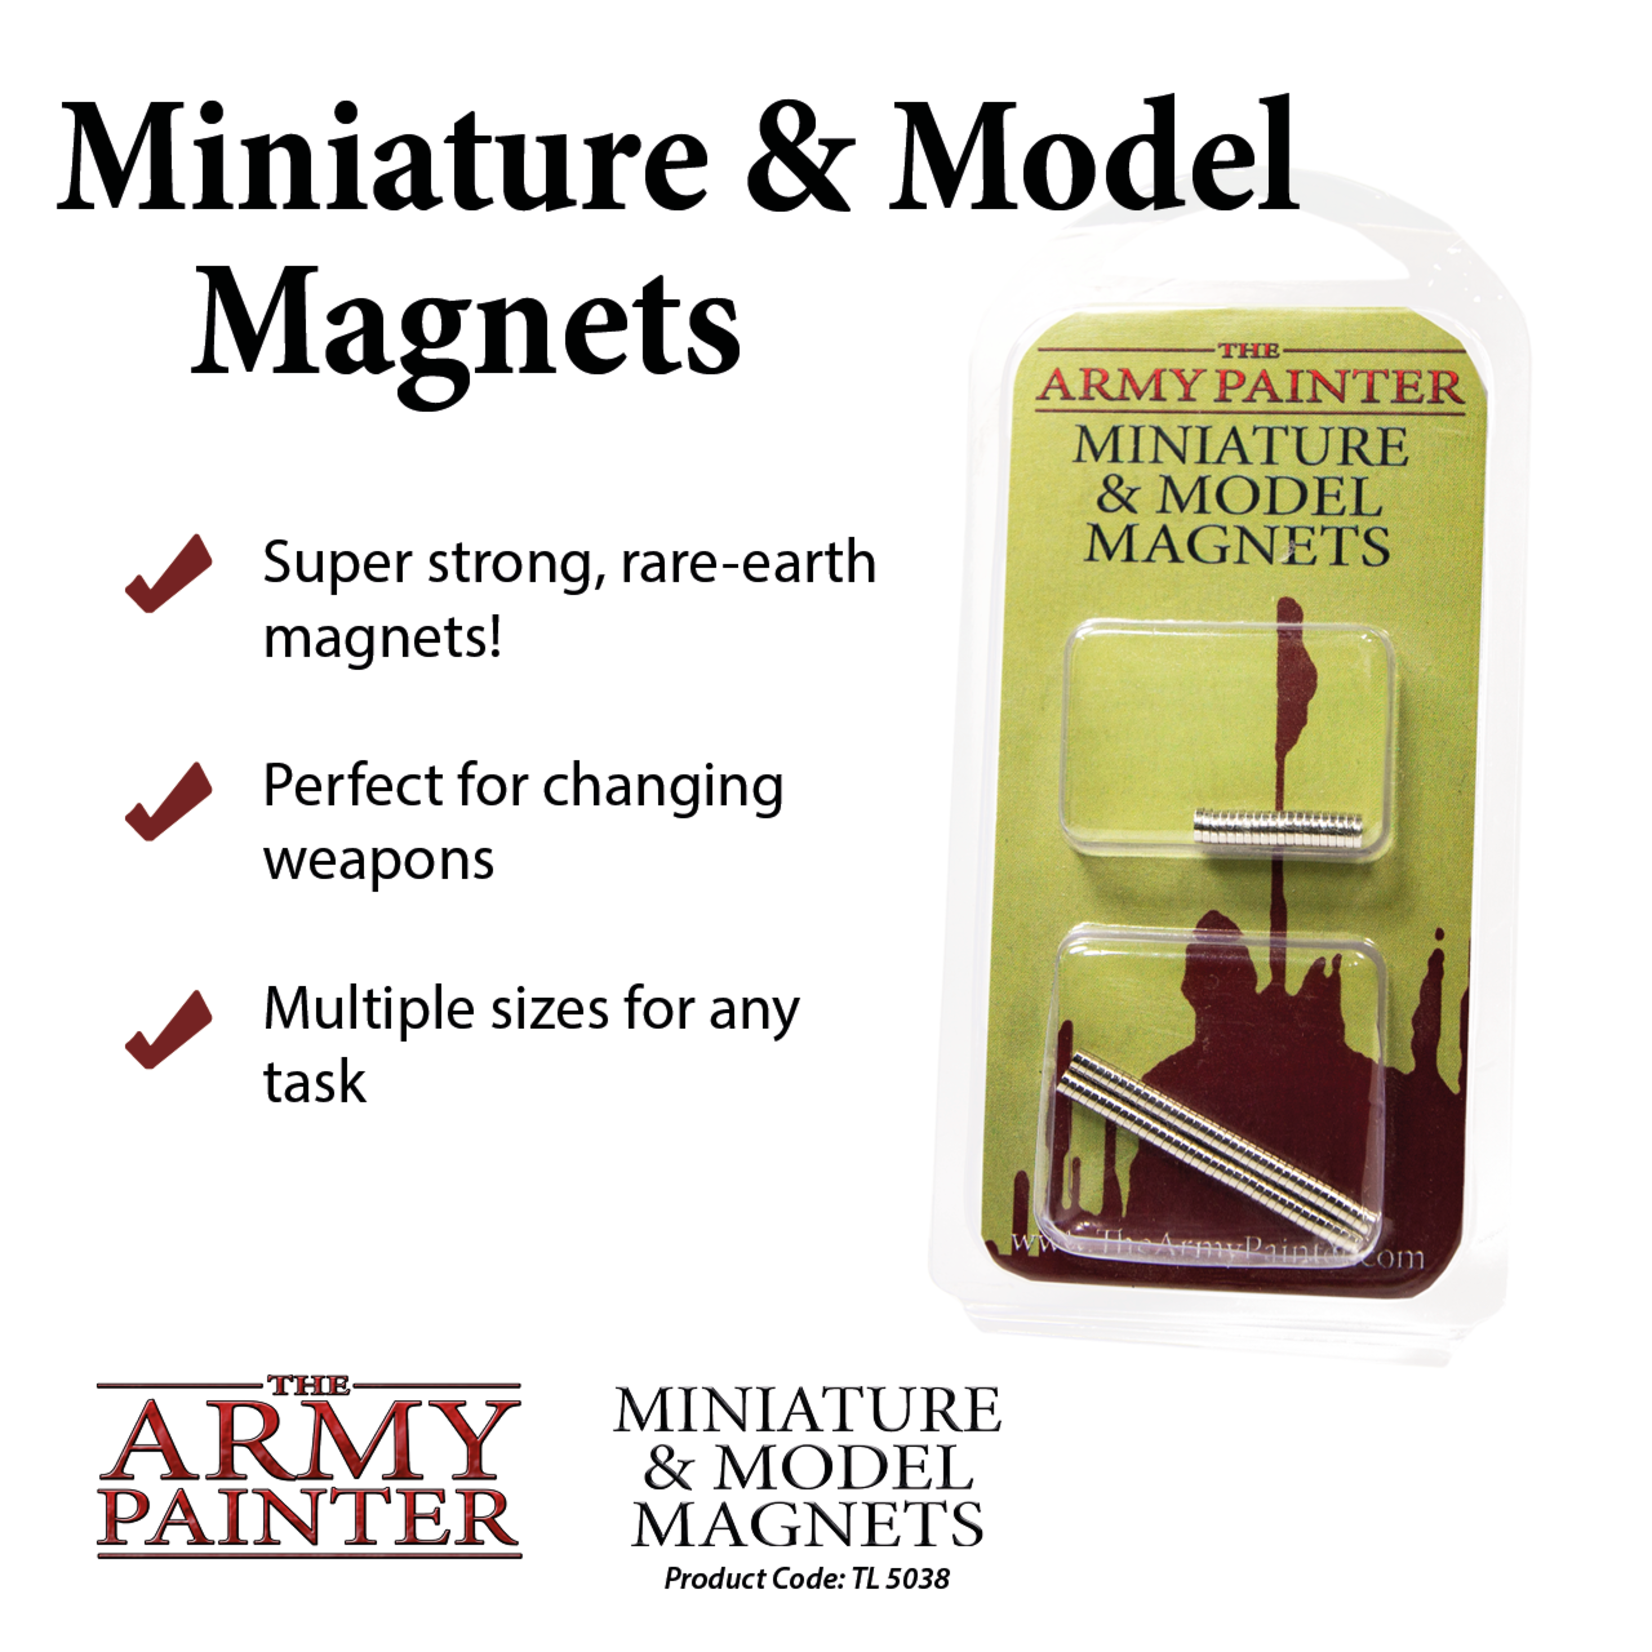 The Army Painter Miniature and Model Magnets